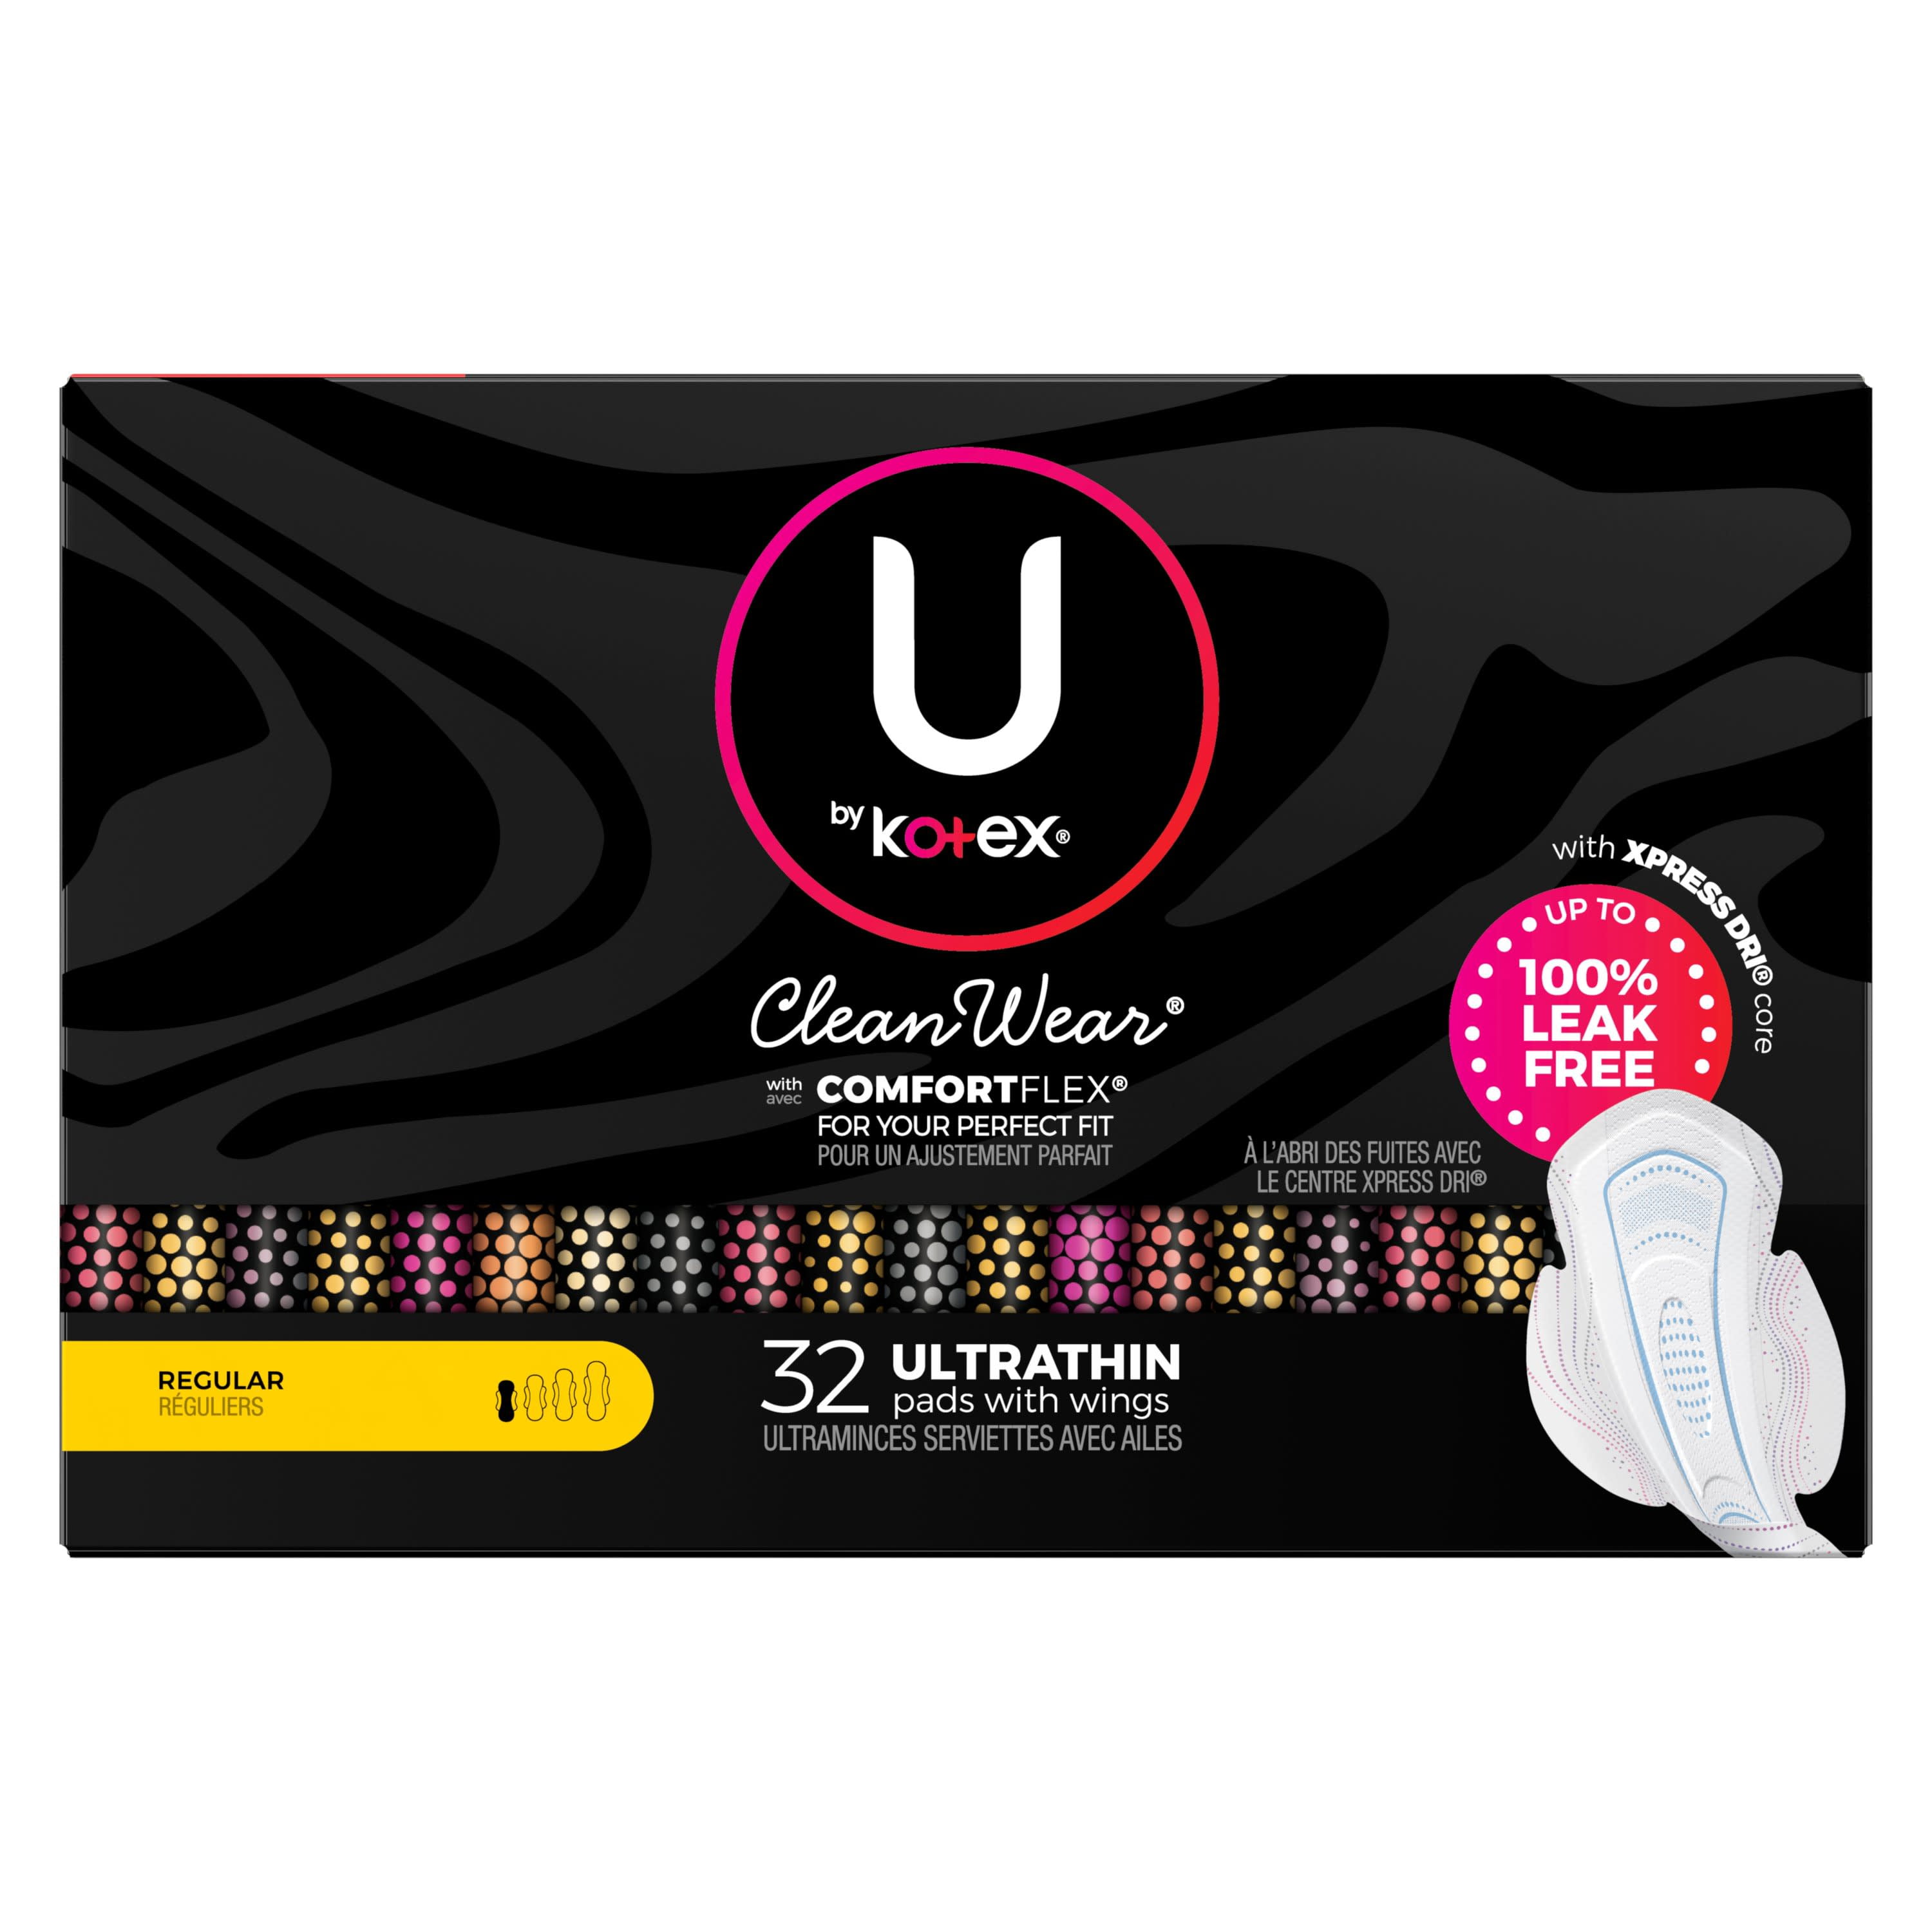 U by Kotex CleanWear Ultra Thin Feminine Pads with Wings, Regular, 16 Count  